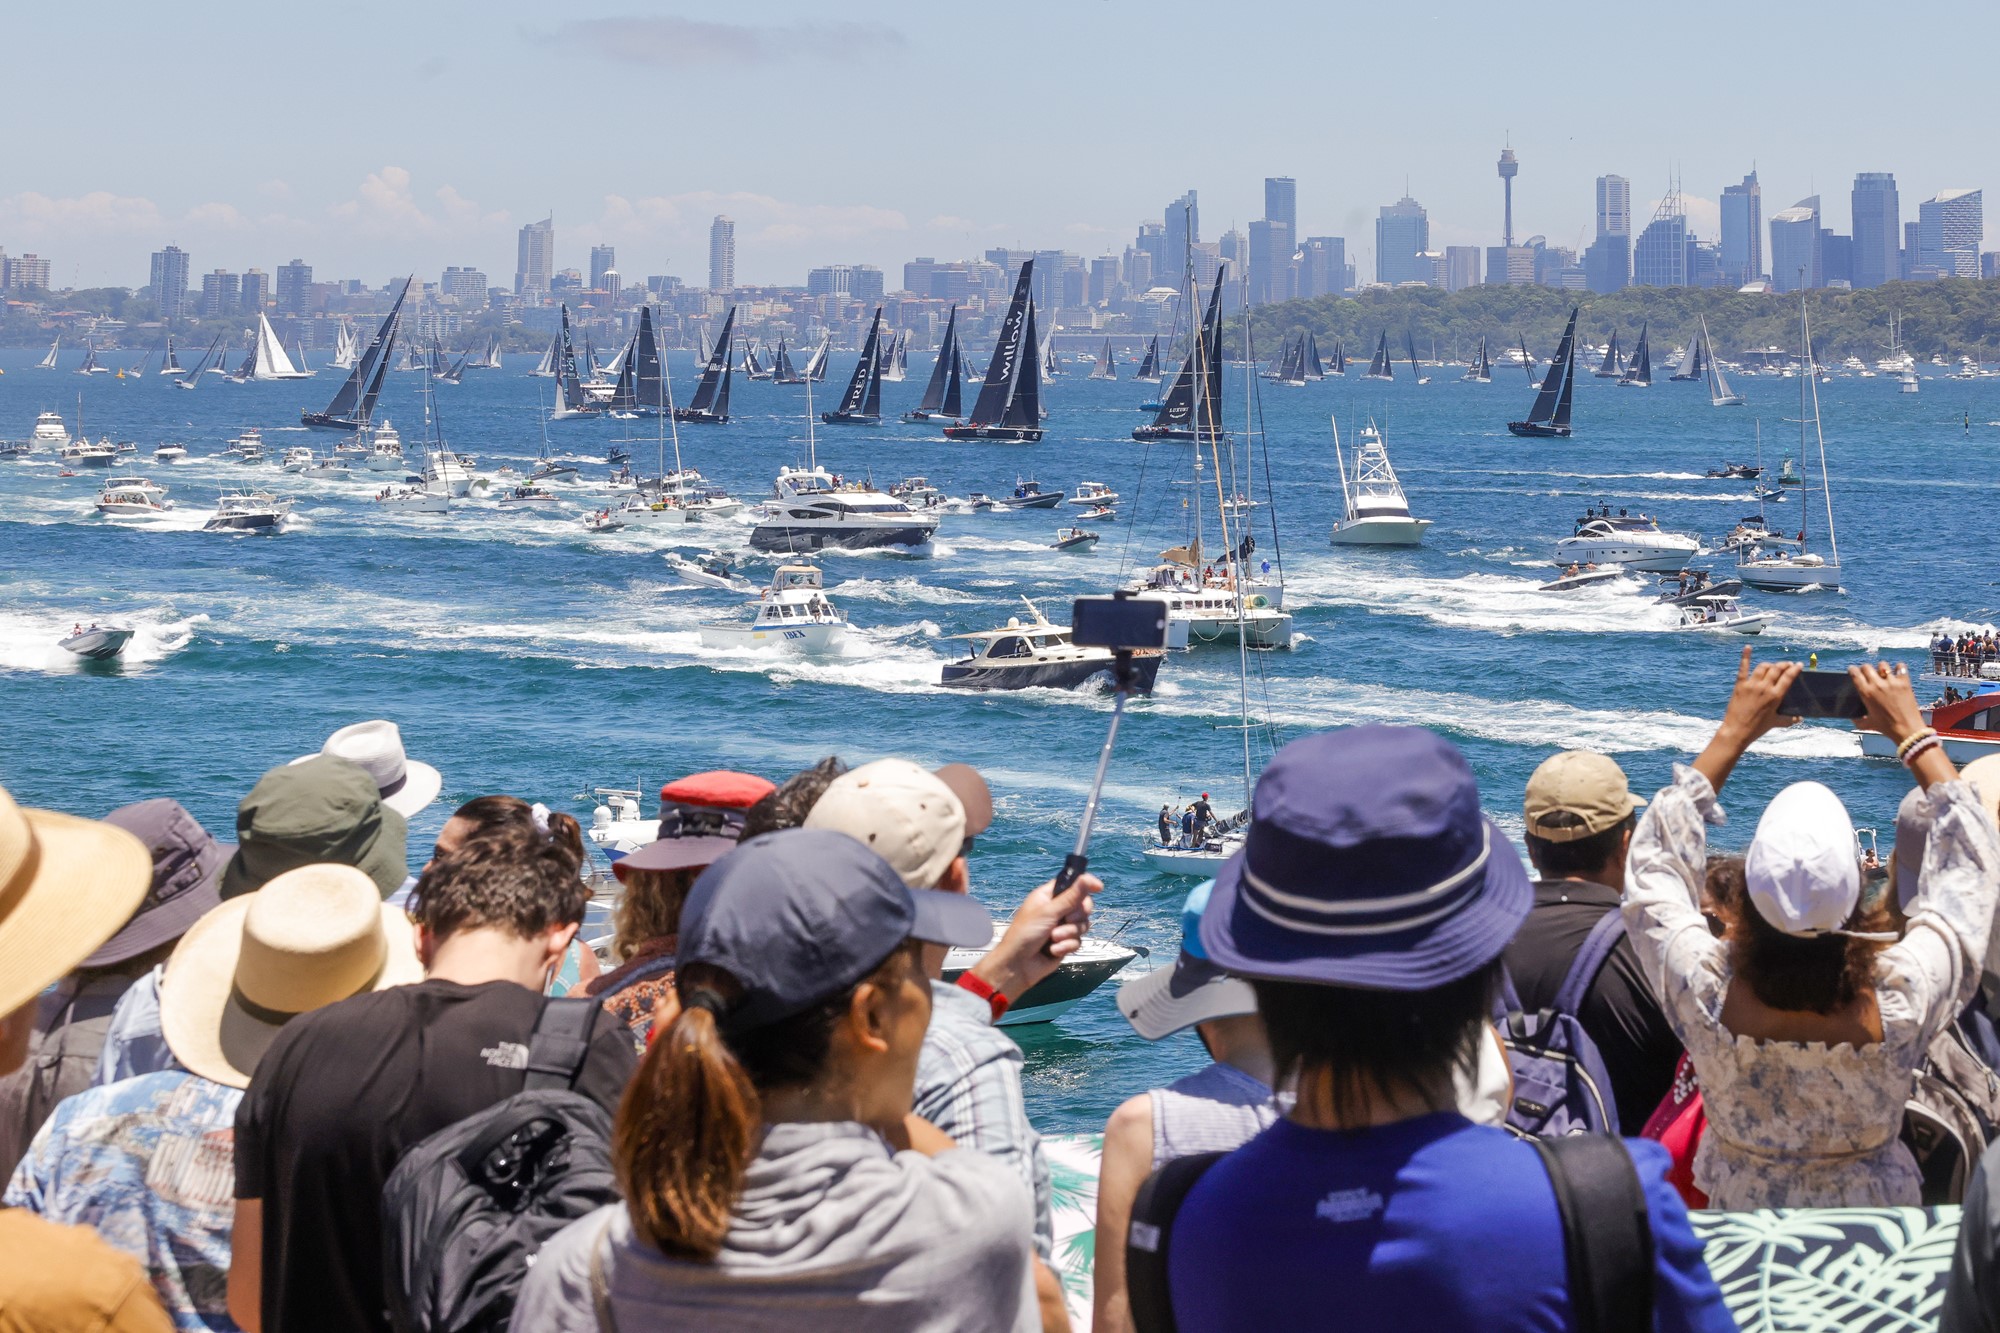 Spectators watch on and take photos of the fleet in the Sydney to Hobart yacht race.